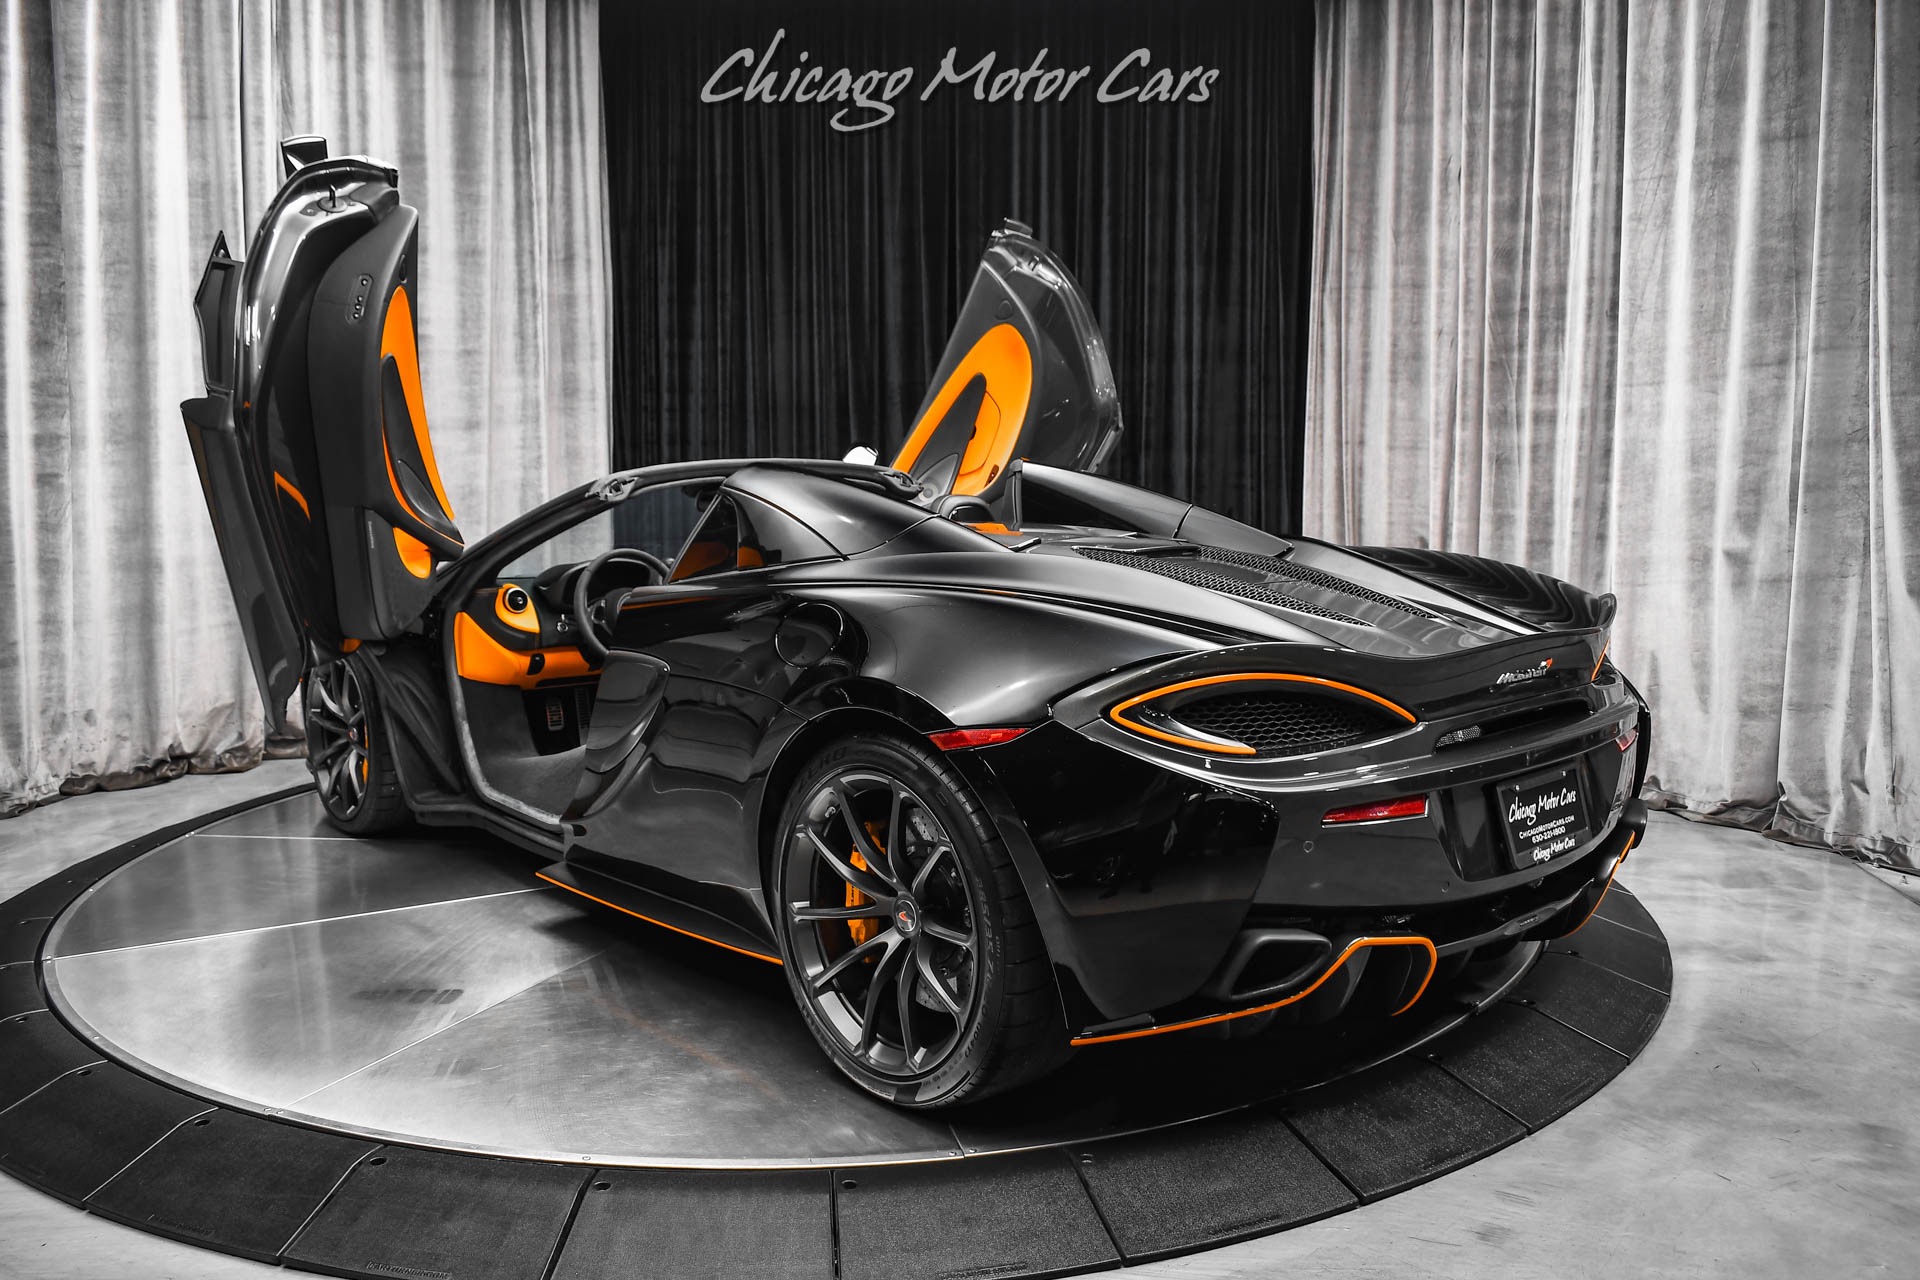 Used-2018-McLaren-570S-Spider-MSO-Abyss-Black-Luxury-Pack-Carbon-Trim-Sports-Exhaust-ONLY-4k-Miles